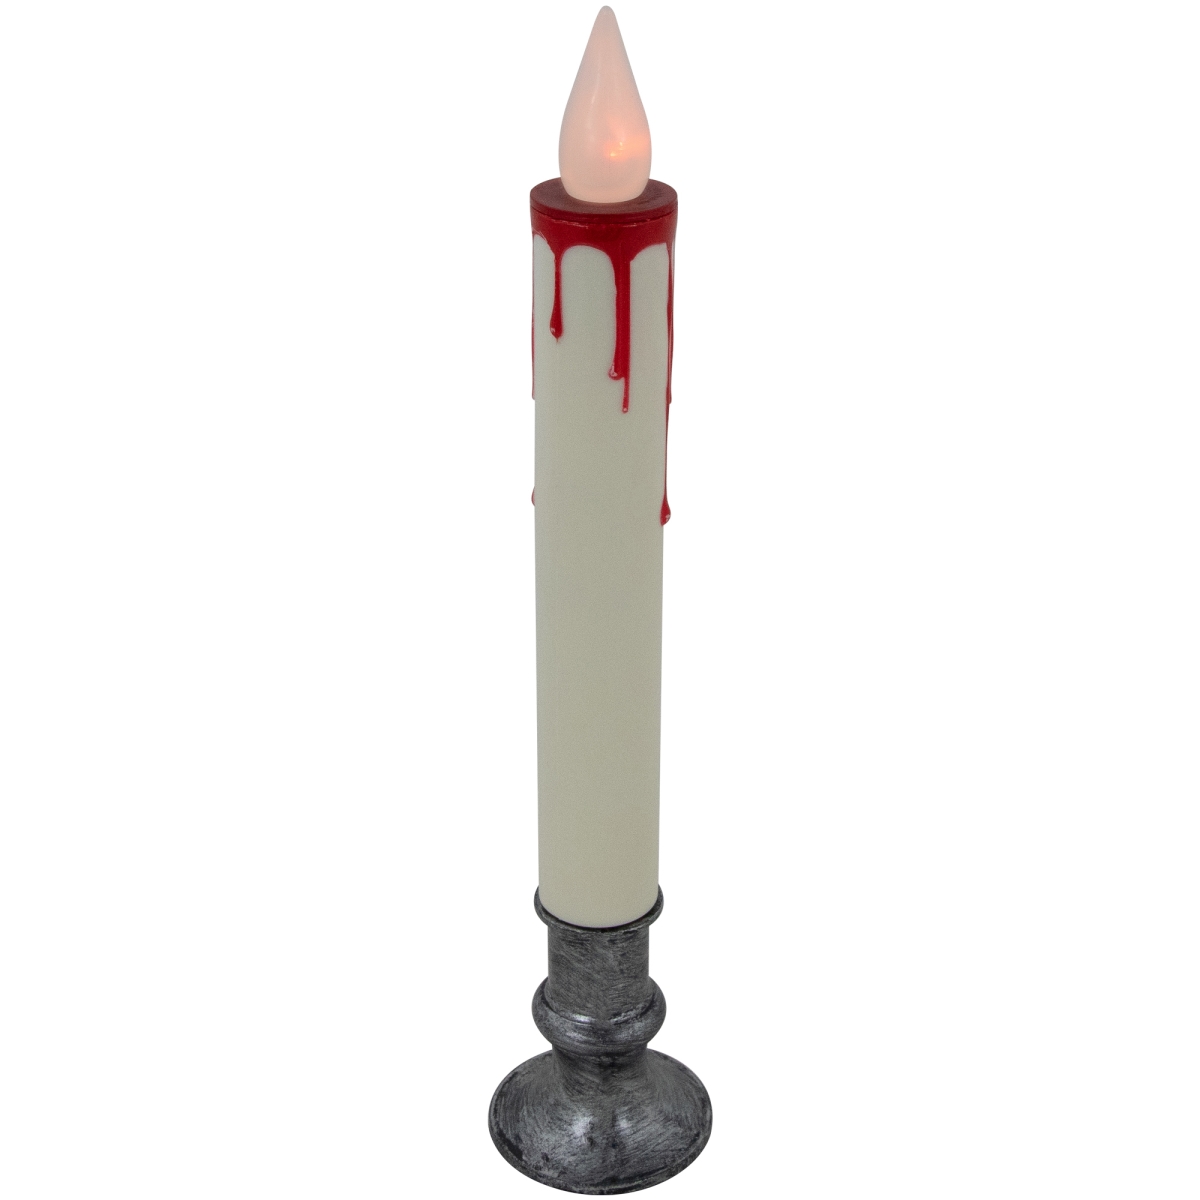 Picture of Brite Star 35256762 9 in. Flickering LED Halloween Candle Lamp with Dripping Blood Effect, Orange Lights